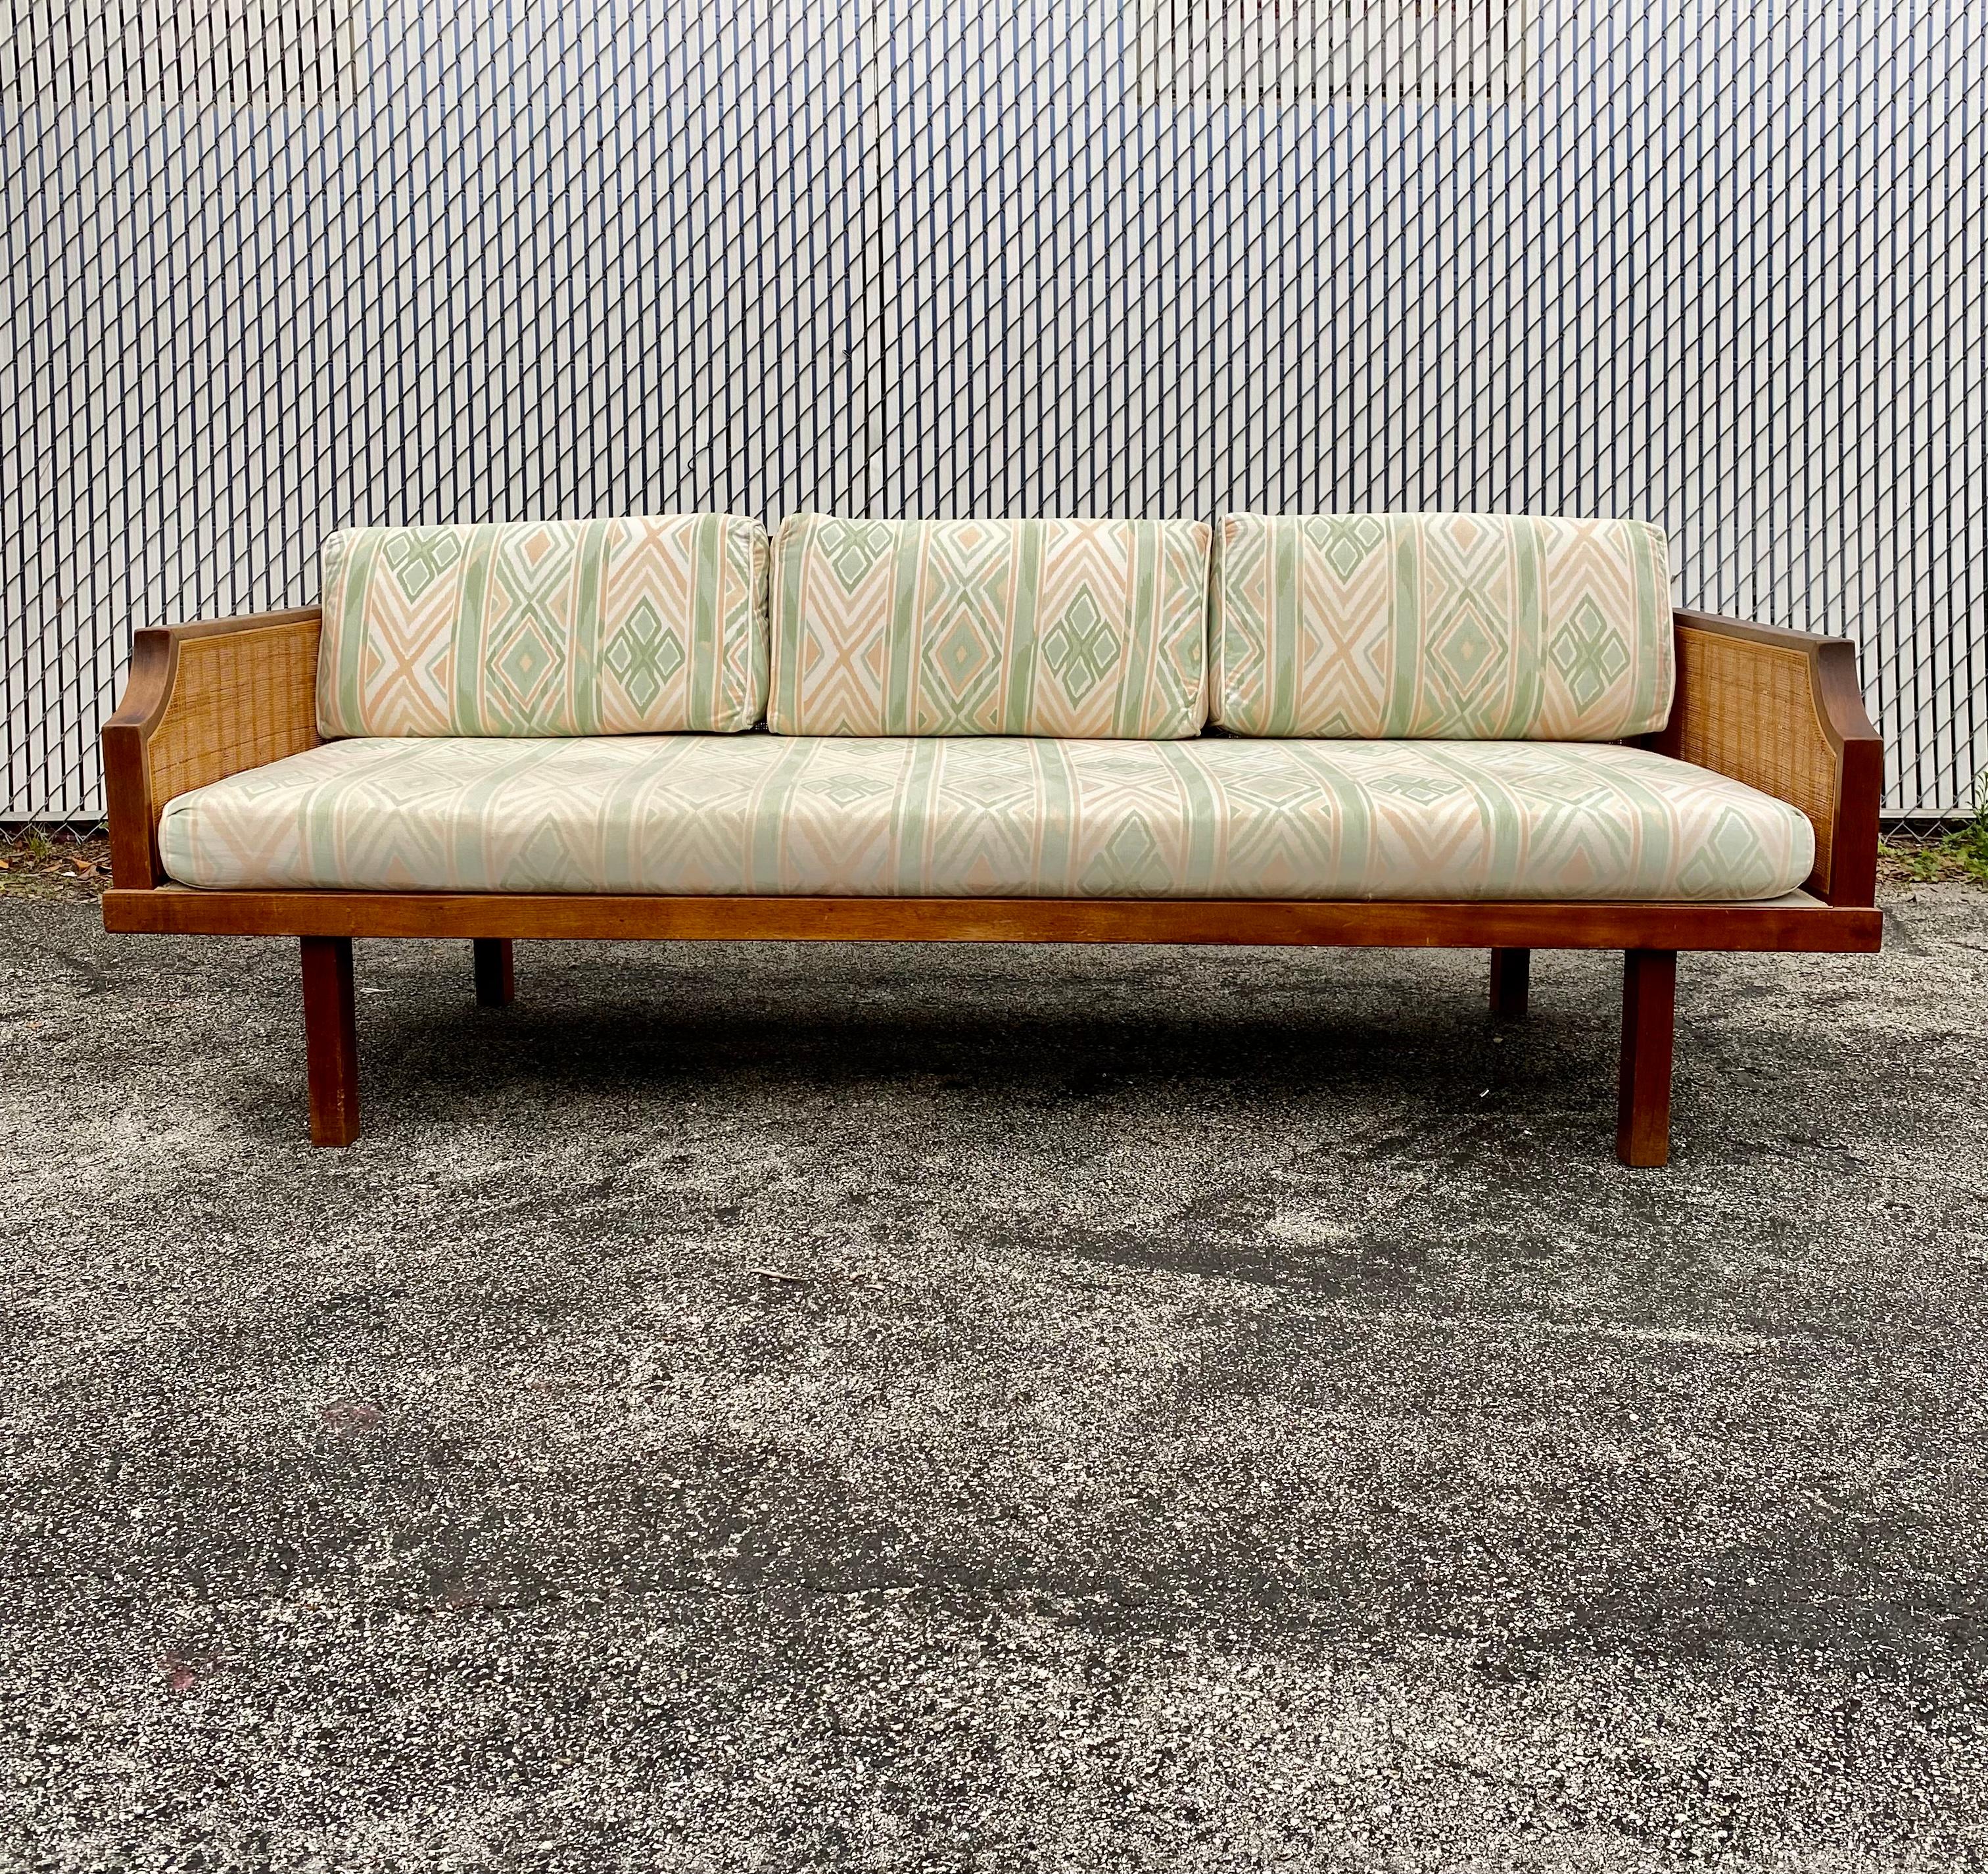 Mid-Century Modern 1960s Mid-Century Teak Cane Sofa or Daybed